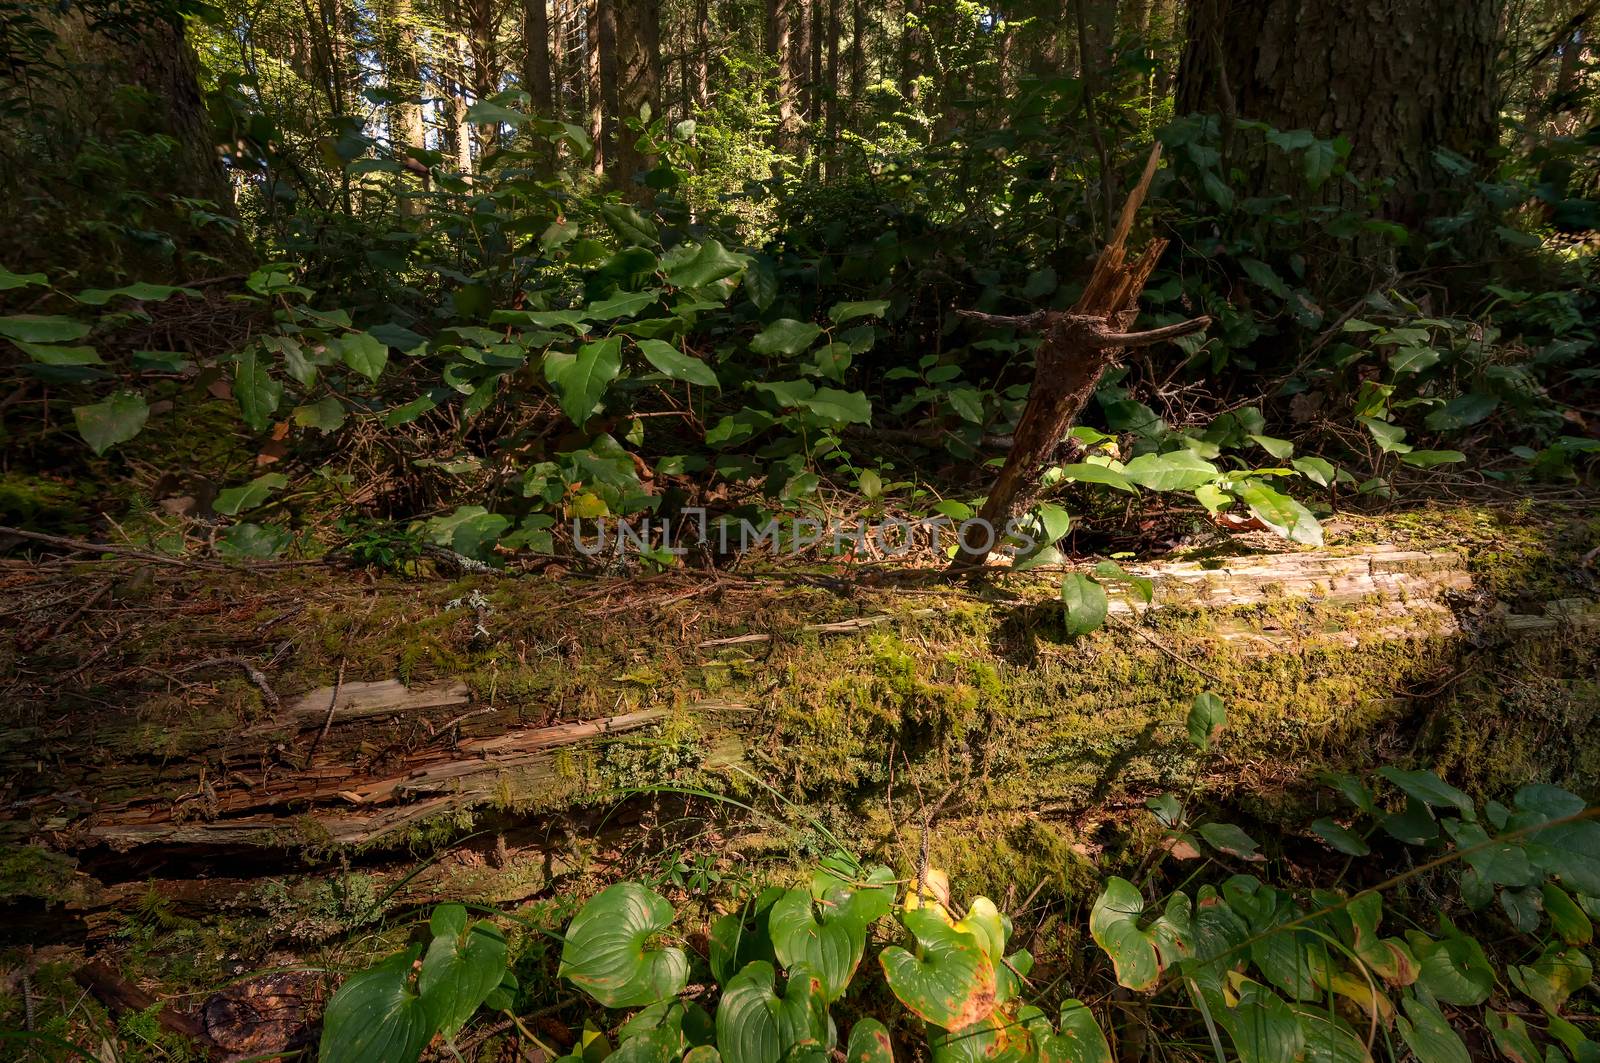 Fallen Redwood Tree in Northern California Forest by backyard_photography